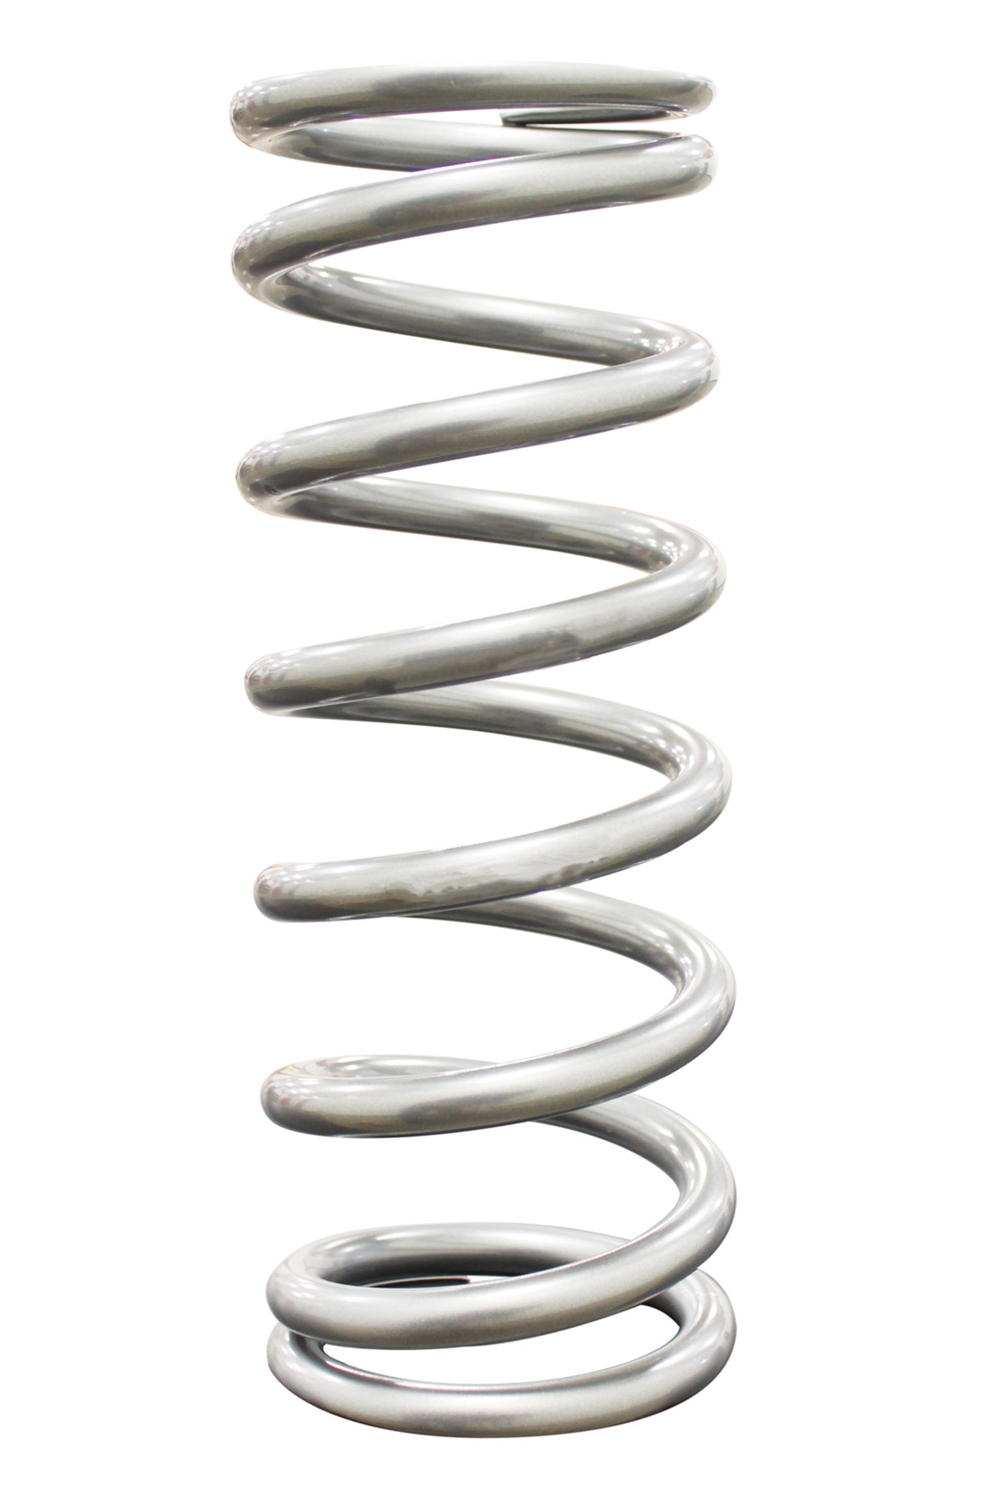 QA1 9HT400 Coil Spring, High Travel, Coil-Over, 2.500 in ID, 9.000 in Length, 400 lb/in Spring Rate, Steel, Silver Powder Coat, Each